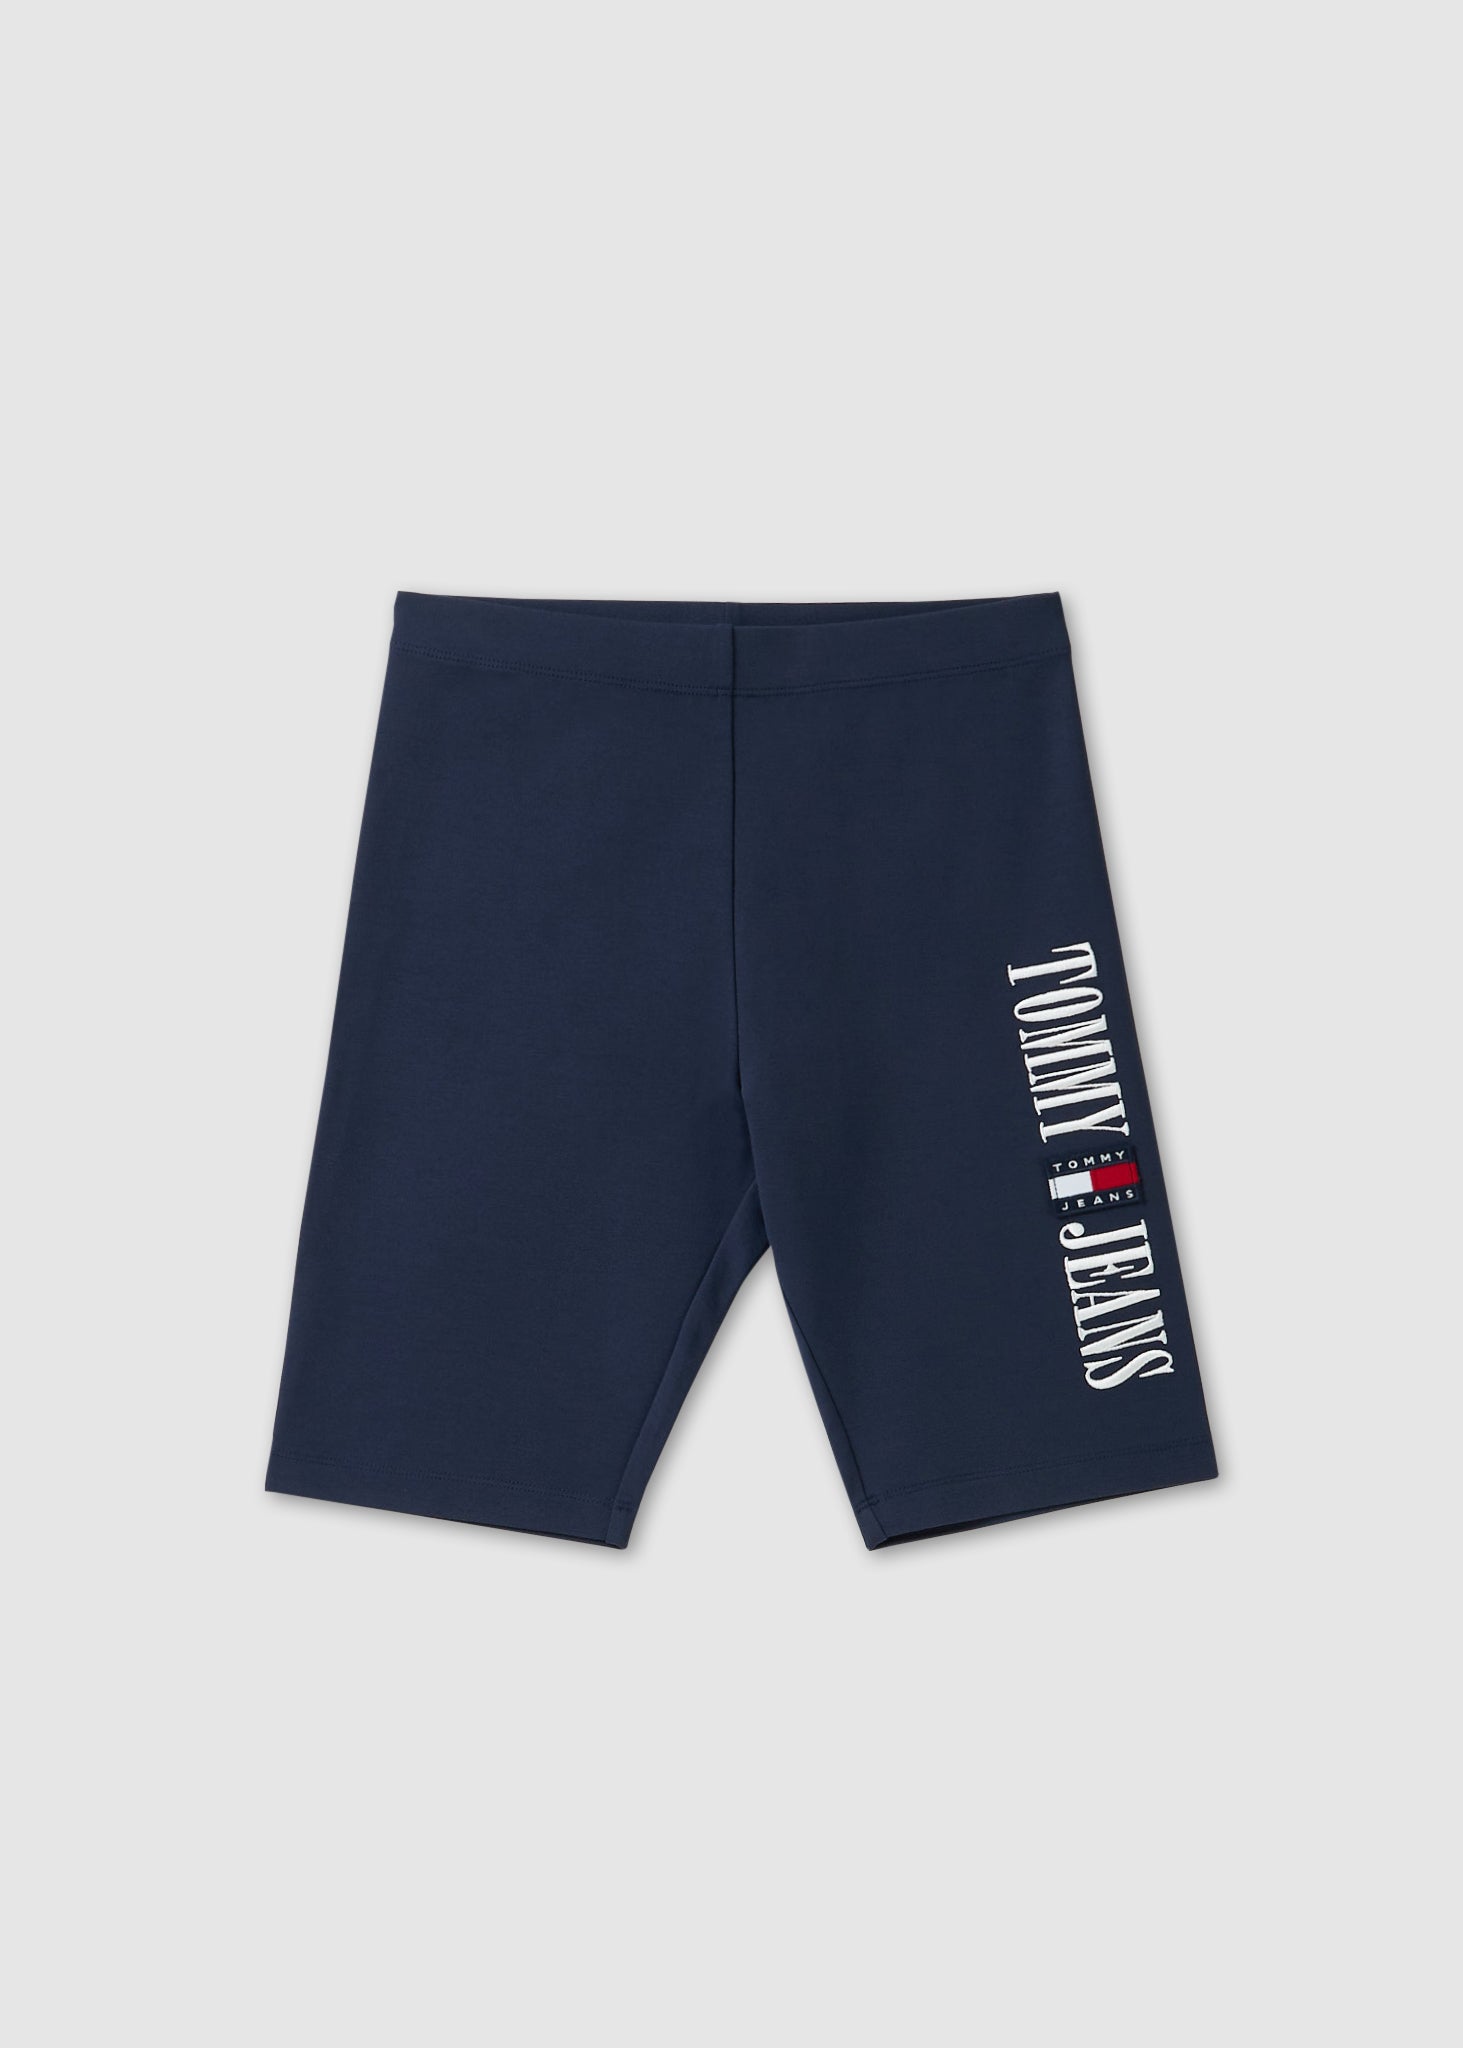 Image of Tommy Hilfiger Womens Navy Cycle Shorts In Twilight Navy